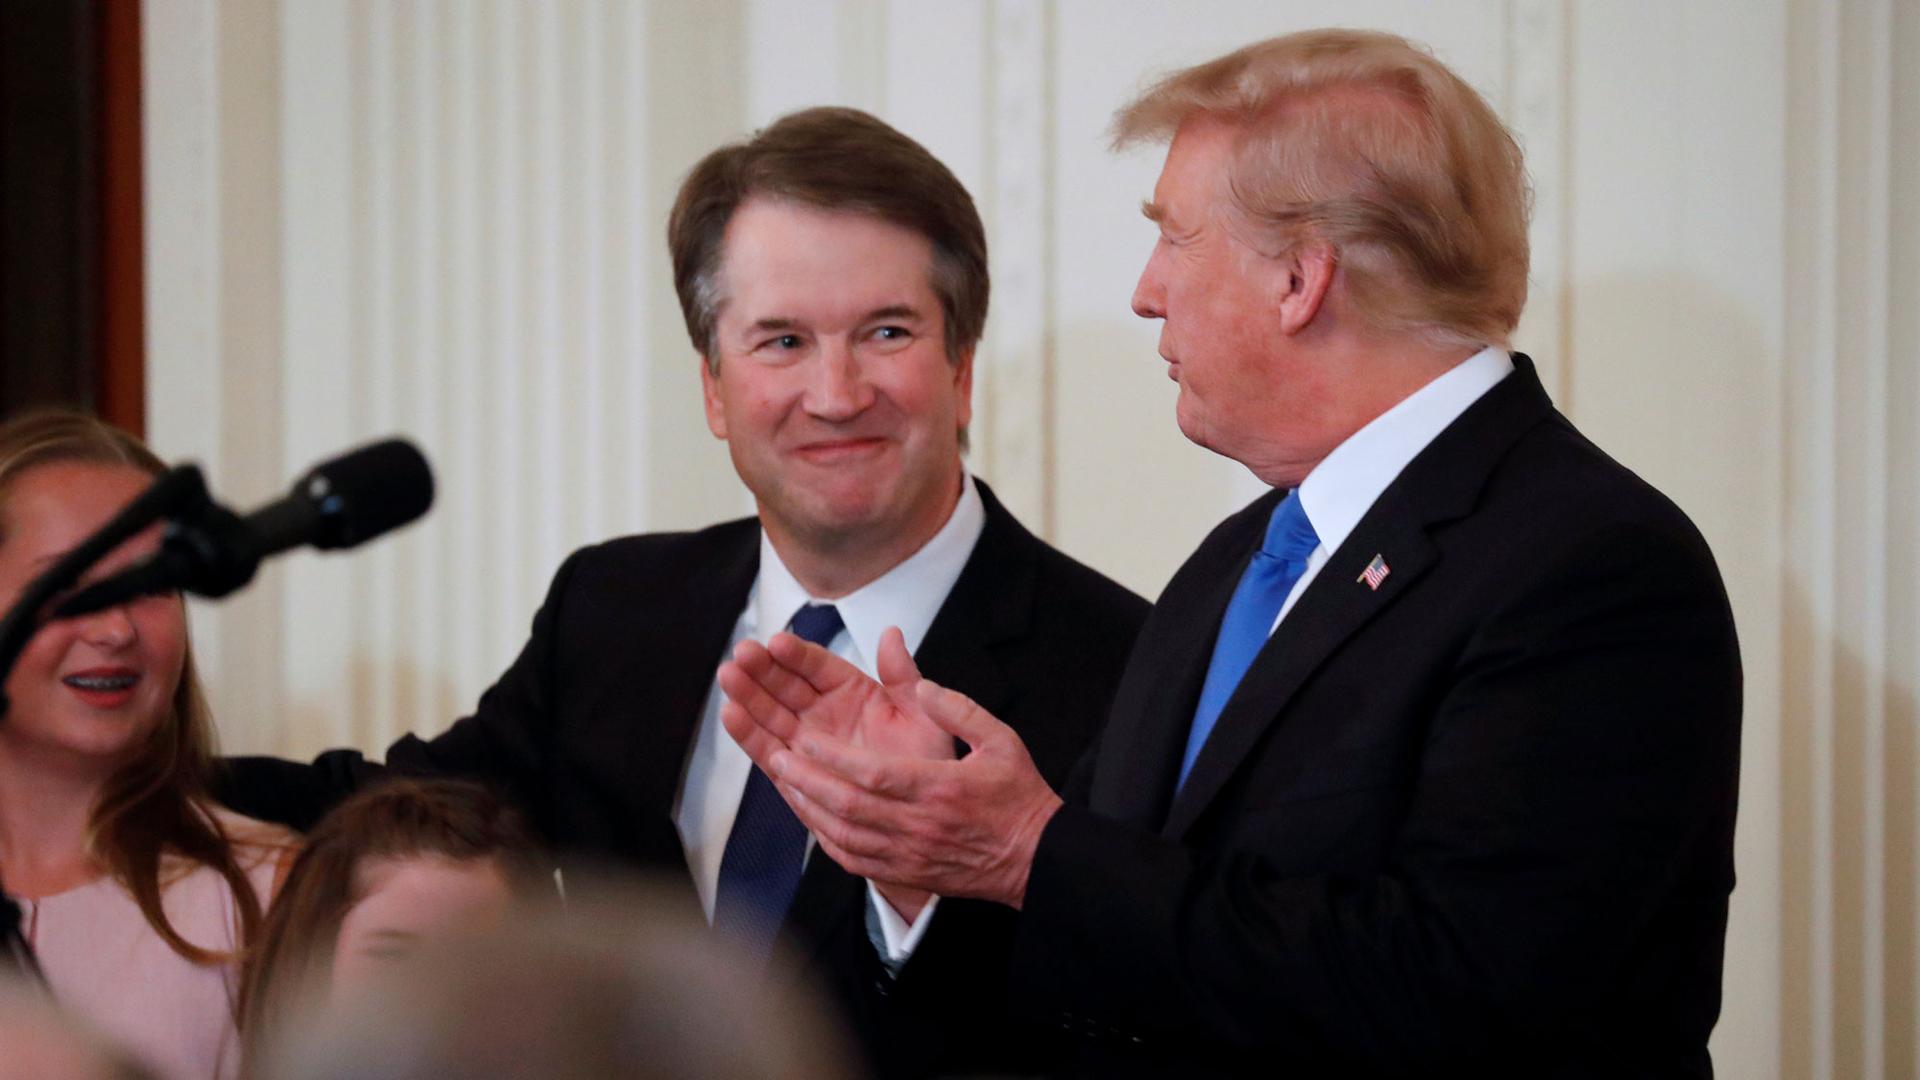 Supreme Court nominee Judge Brett Kavanaugh stands next to left of US President Donald Trump in the East Room of the White House in Washington, DC, on July 9, 2018, during Trump's announcement of his Supreme Court pick.